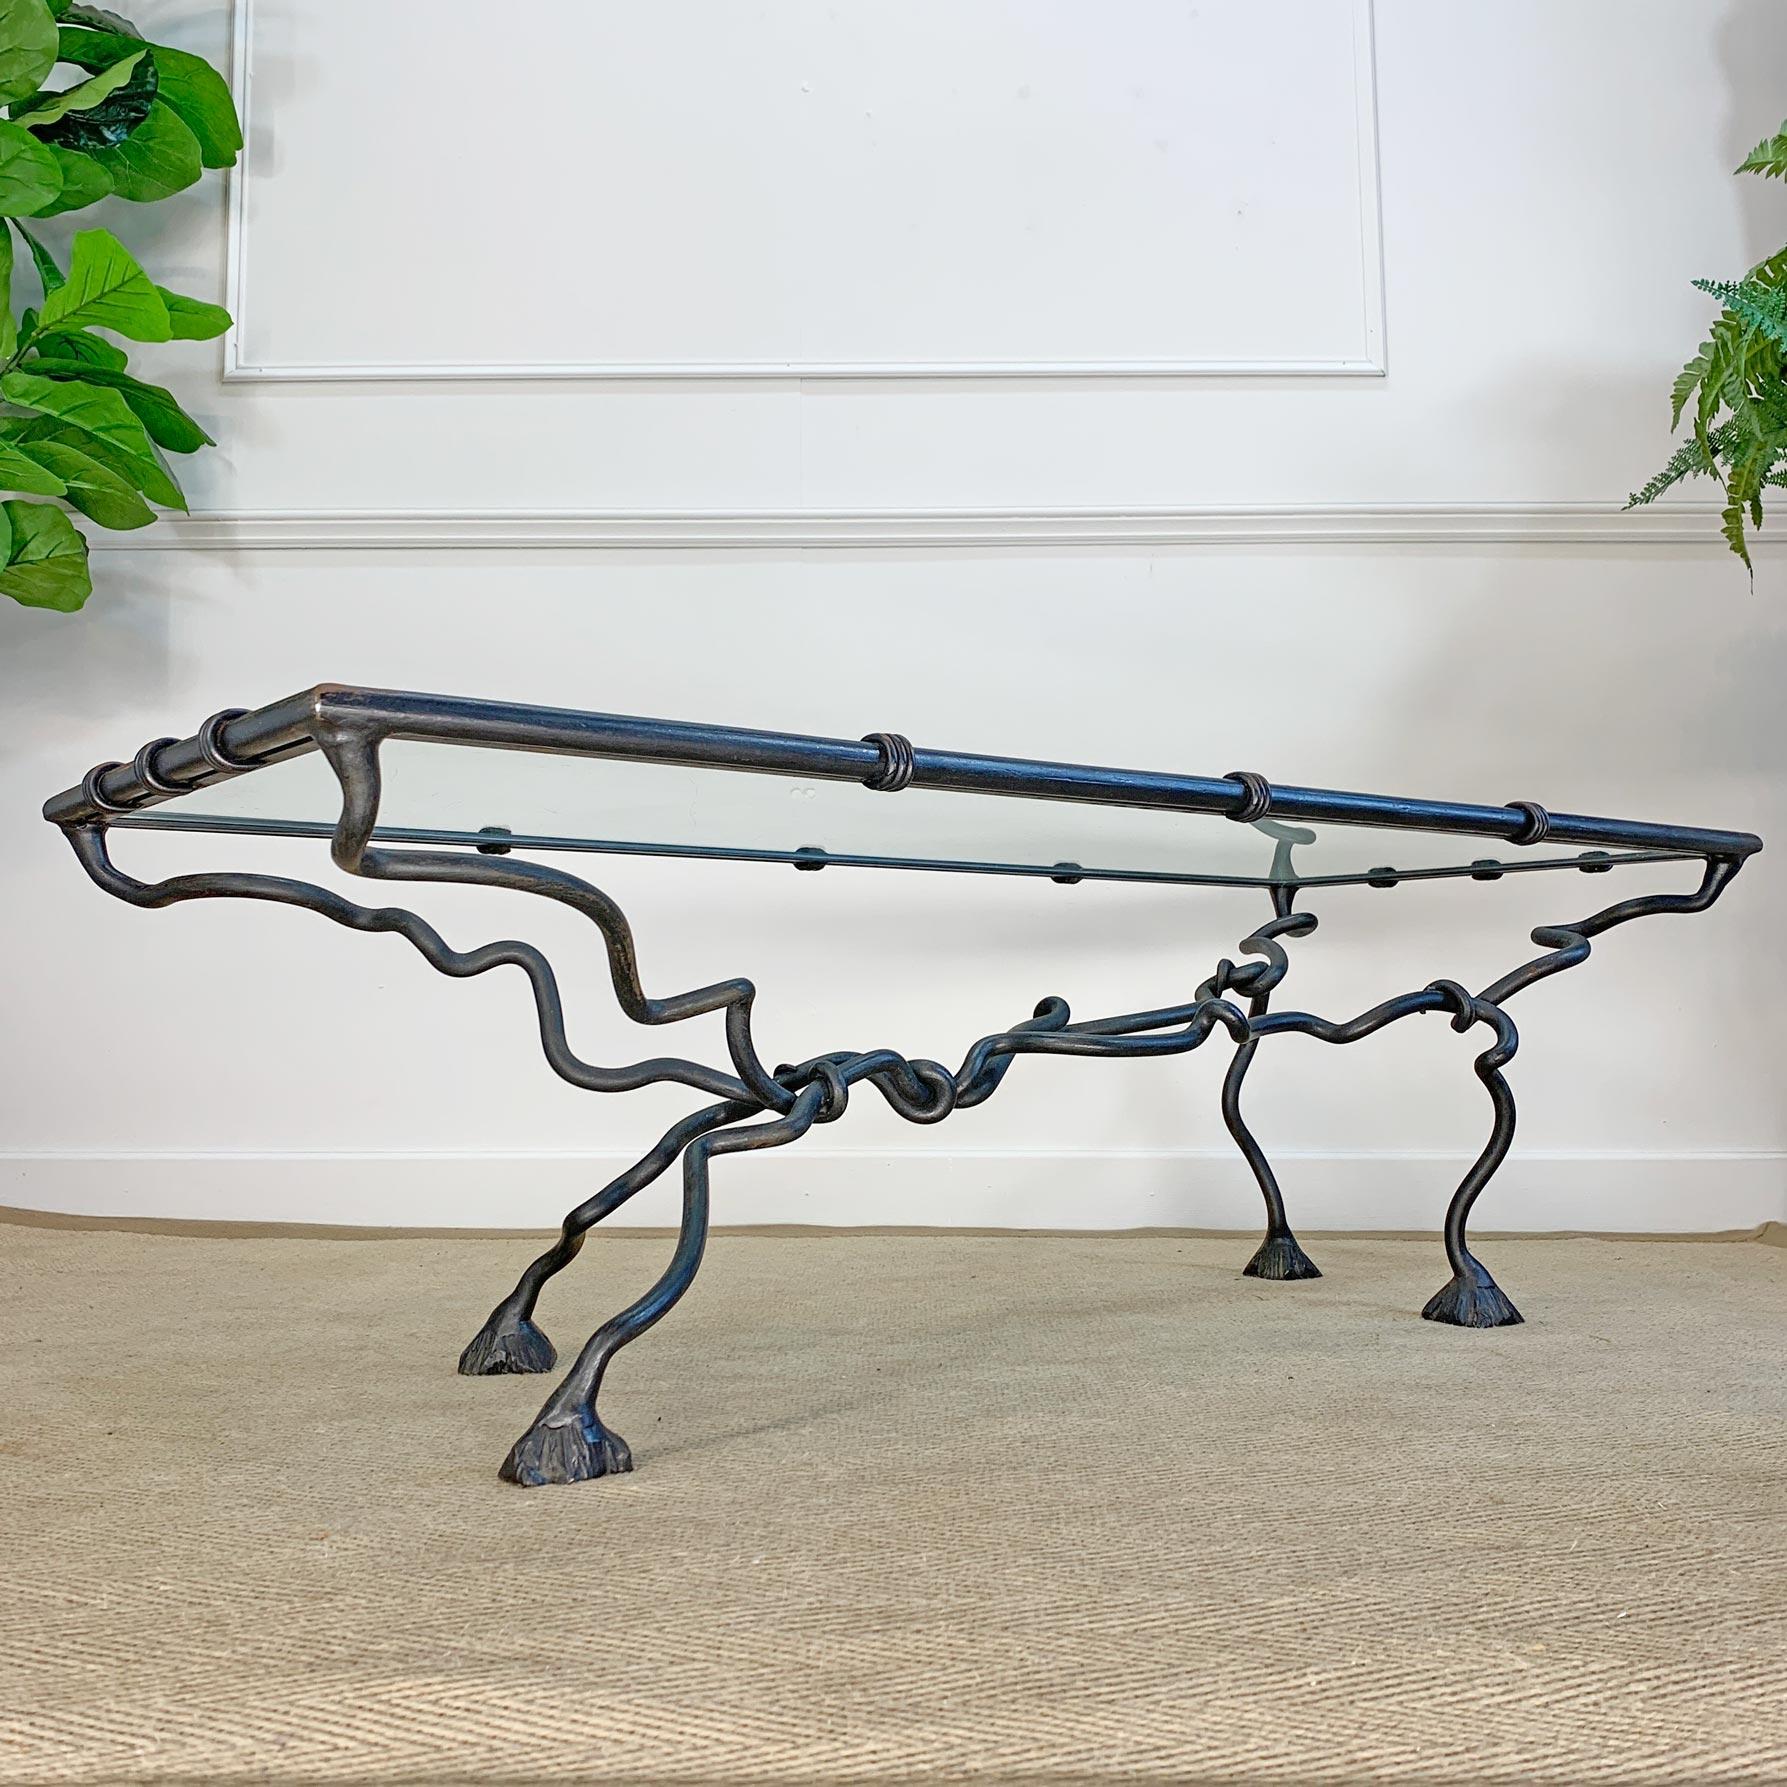 A wonderfully ornate hand crafted mid-century wrought iron coffee table, the legs worked and twisted to give the impression of a Leopard or Gazelle running, the animalistic design has been exceptionally well executed, with great attention given to